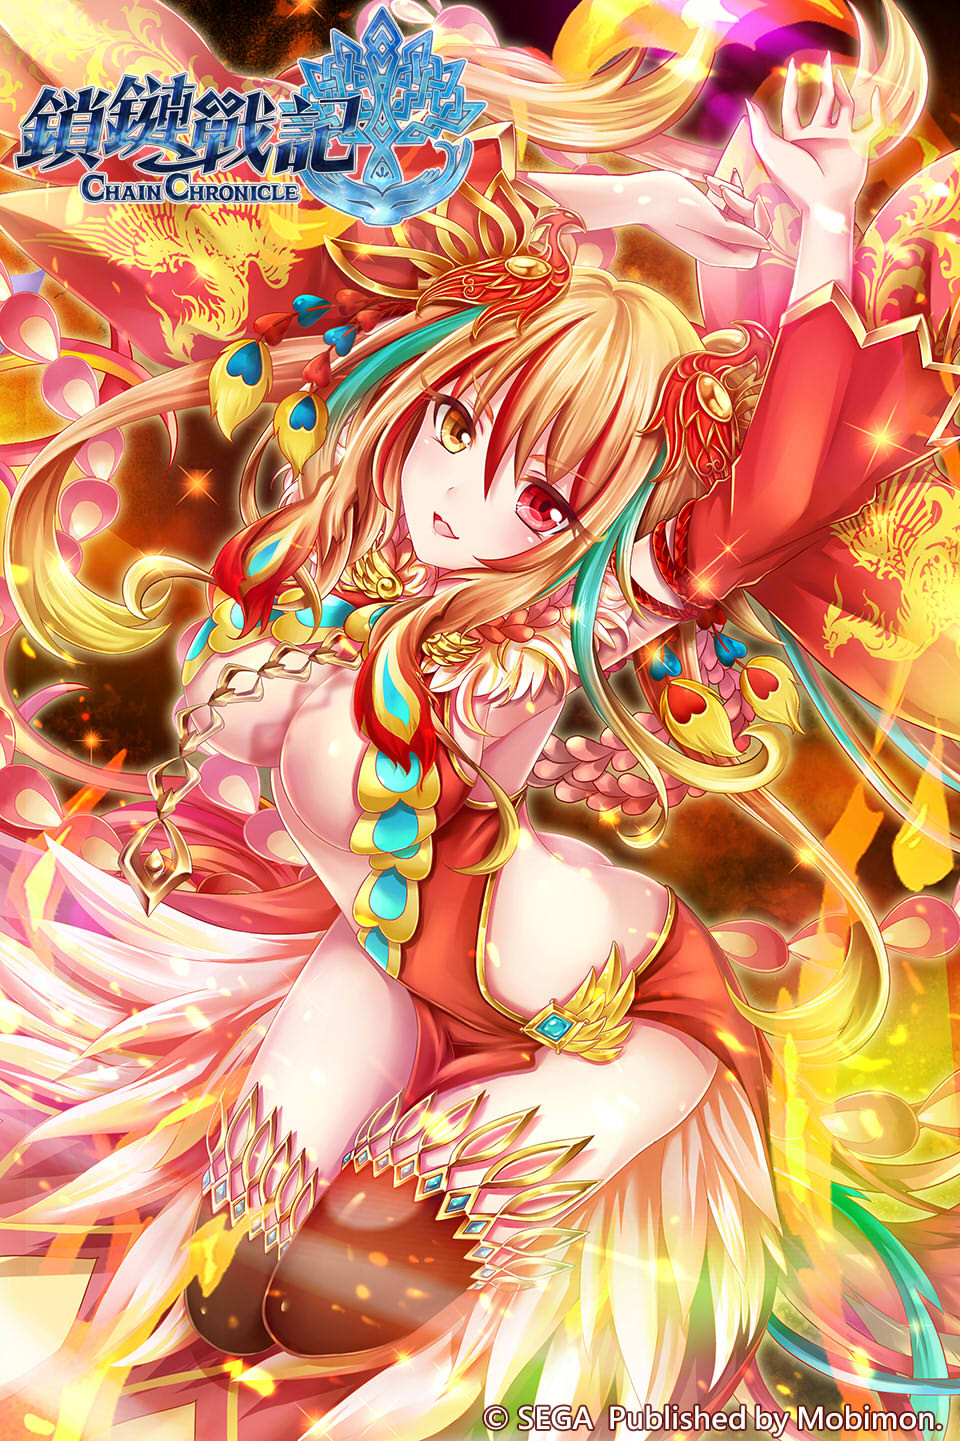 1girl armpits arms_up ass bird_hair_ornament breasts brown_legwear chain_chronicle copyright_name detached_sleeves eyebrows_visible_through_hair gradient_hair hair_ornament heterochromia highres logo looking_at_viewer multicolored_hair official_art omone_chou orange_hair red_eyes solo thighs yellow_eyes